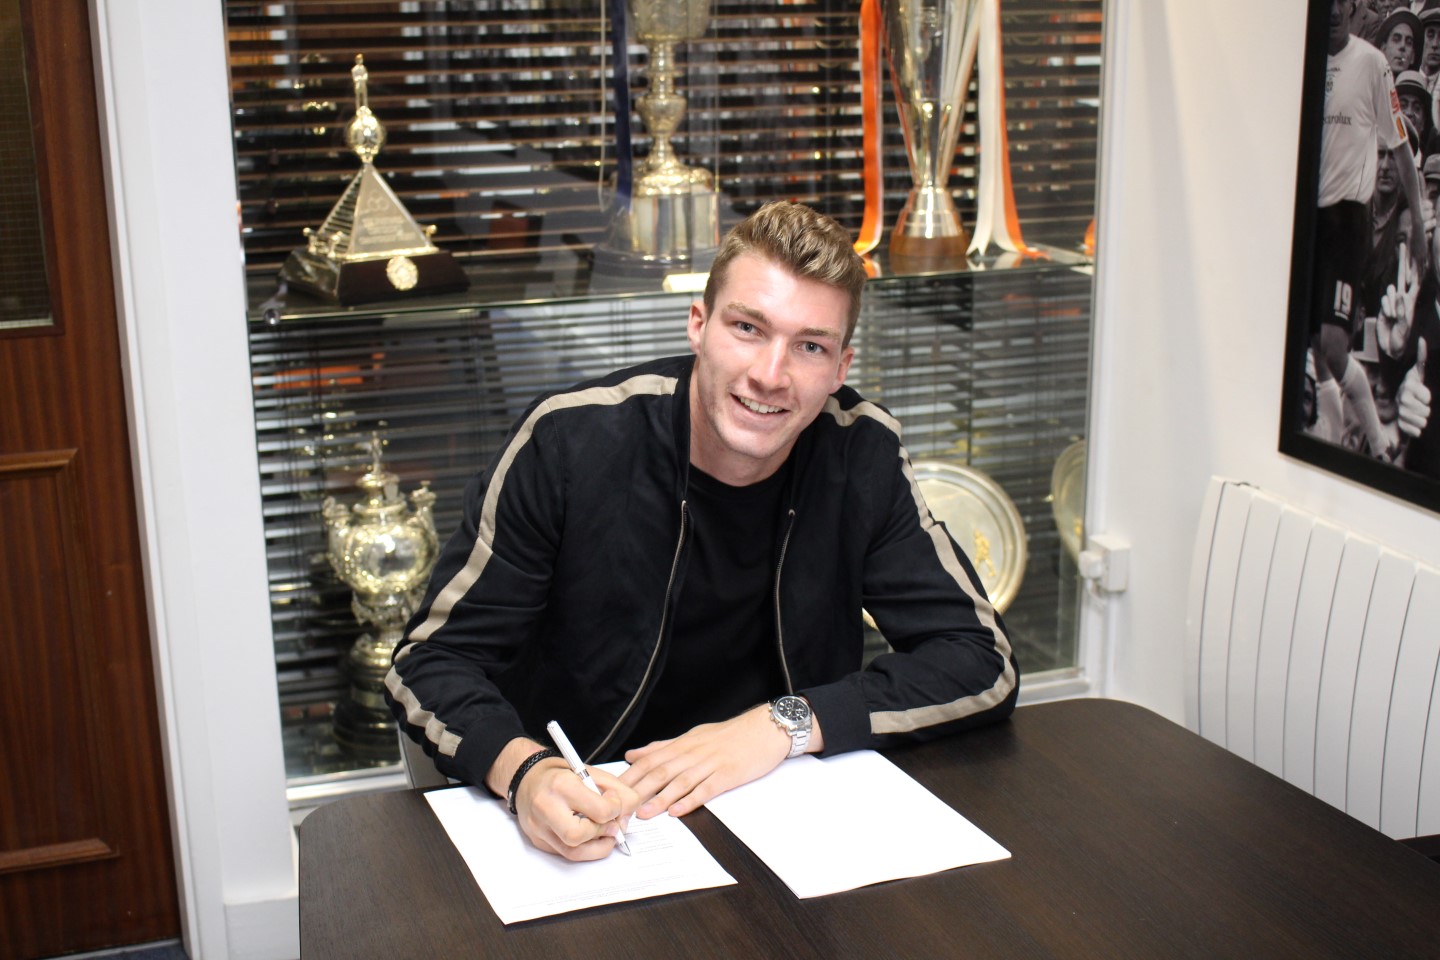 Jack Stacey signs his contract with the Hatters in the Kenilworth Road Trophy Room